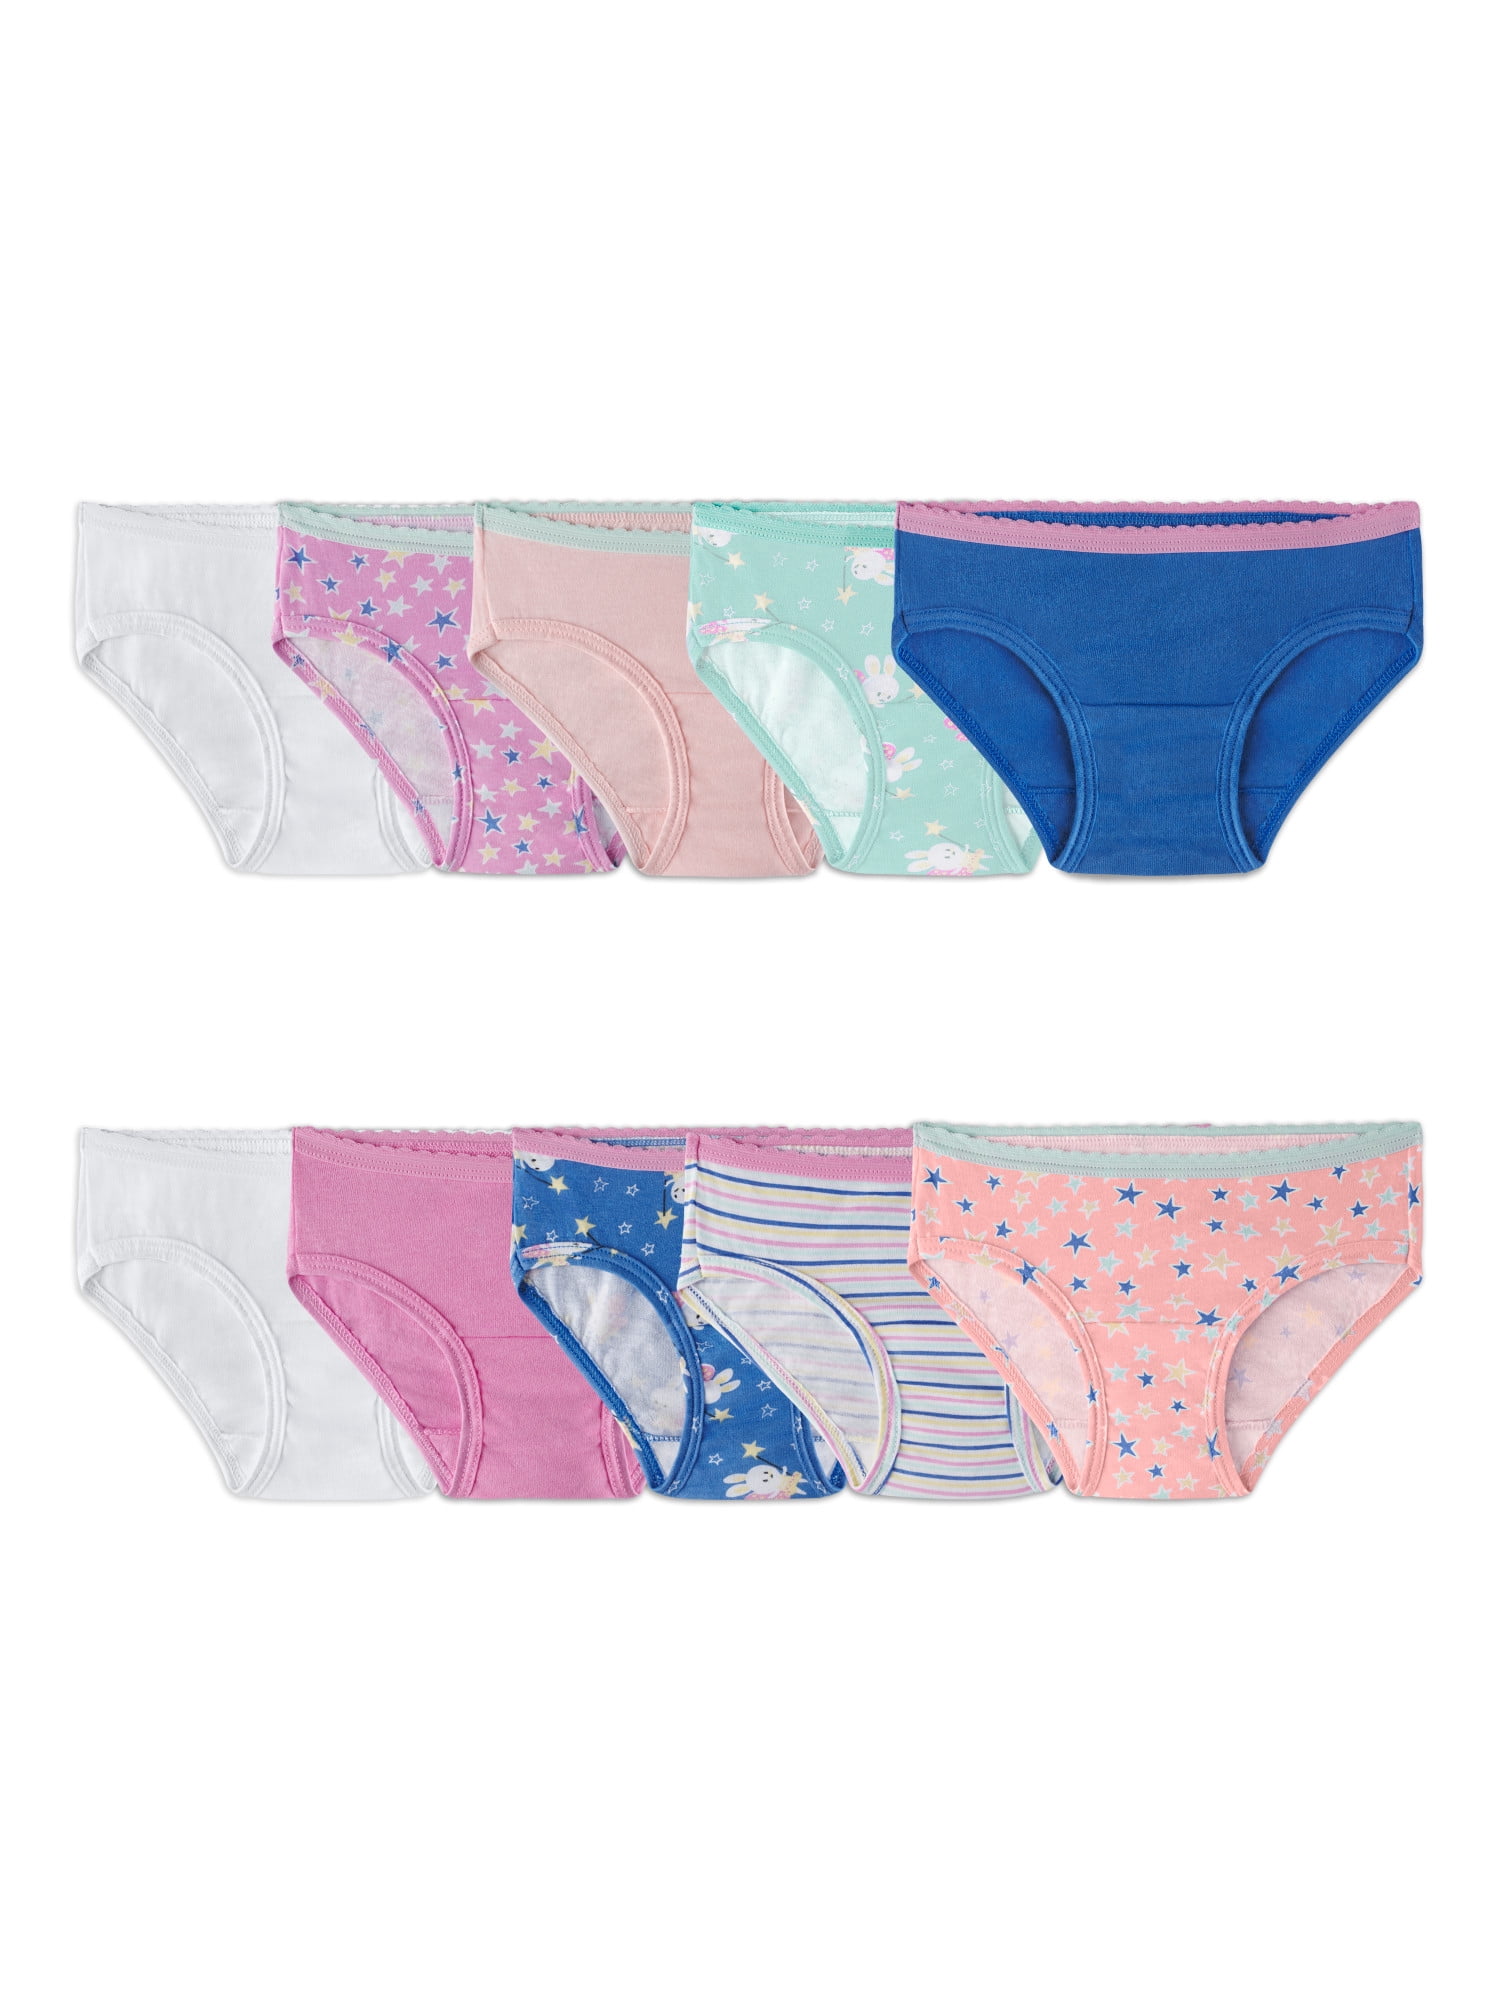  Fruit Of The Loom Girls Cotton Hipster Underwear